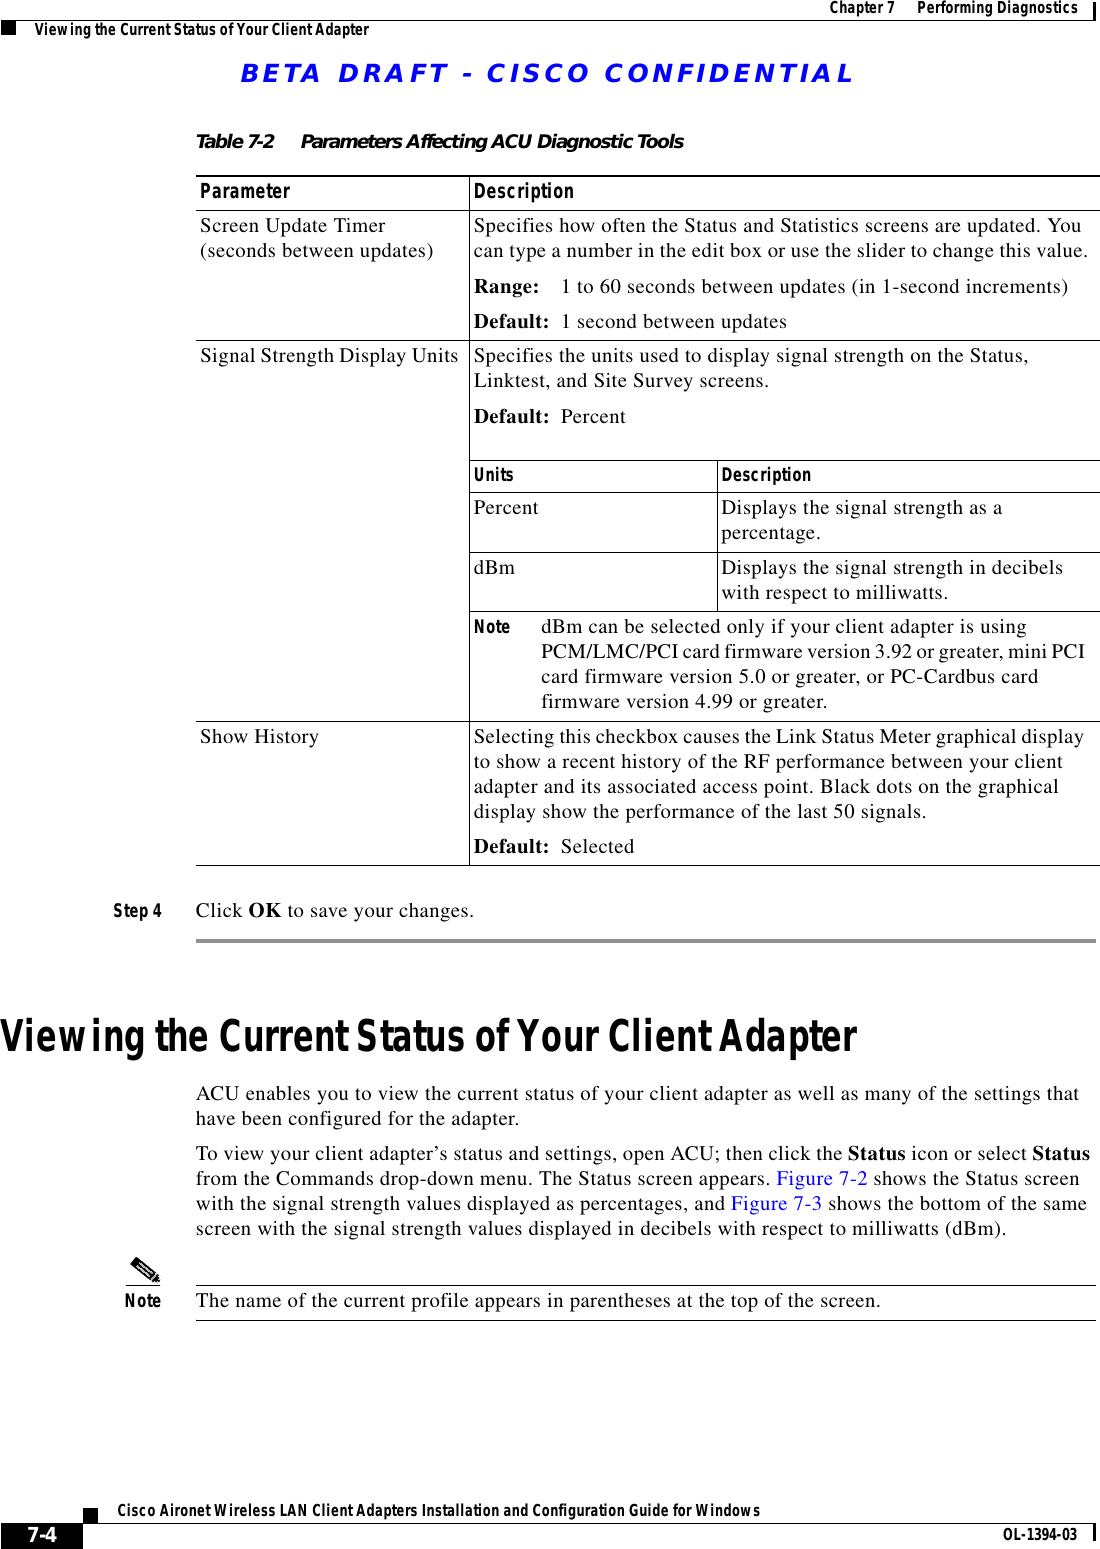 BETA DRAFT - CISCO CONFIDENTIAL7-4Cisco Aironet Wireless LAN Client Adapters Installation and Configuration Guide for Windows OL-1394-03Chapter 7      Performing DiagnosticsViewing the Current Status of Your Client AdapterStep 4 Click OK to save your changes.Viewing the Current Status of Your Client AdapterACU enables you to view the current status of your client adapter as well as many of the settings that have been configured for the adapter.To view your client adapter’s status and settings, open ACU; then click the Status icon or select Status from the Commands drop-down menu. The Status screen appears. Figure 7-2 shows the Status screen with the signal strength values displayed as percentages, and Figure 7-3 shows the bottom of the same screen with the signal strength values displayed in decibels with respect to milliwatts (dBm). Note The name of the current profile appears in parentheses at the top of the screen.Table 7-2 Parameters Affecting ACU Diagnostic ToolsParameter DescriptionScreen Update Timer (seconds between updates) Specifies how often the Status and Statistics screens are updated. You can type a number in the edit box or use the slider to change this value.Range: 1 to 60 seconds between updates (in 1-second increments)Default: 1 second between updatesSignal Strength Display Units Specifies the units used to display signal strength on the Status, Linktest, and Site Survey screens.Default: PercentUnits DescriptionPercent Displays the signal strength as a percentage.dBm Displays the signal strength in decibels with respect to milliwatts.Note dBm can be selected only if your client adapter is using PCM/LMC/PCI card firmware version 3.92 or greater, mini PCI card firmware version 5.0 or greater, or PC-Cardbus card firmware version 4.99 or greater.Show History Selecting this checkbox causes the Link Status Meter graphical display to show a recent history of the RF performance between your client adapter and its associated access point. Black dots on the graphical display show the performance of the last 50 signals.Default: Selected